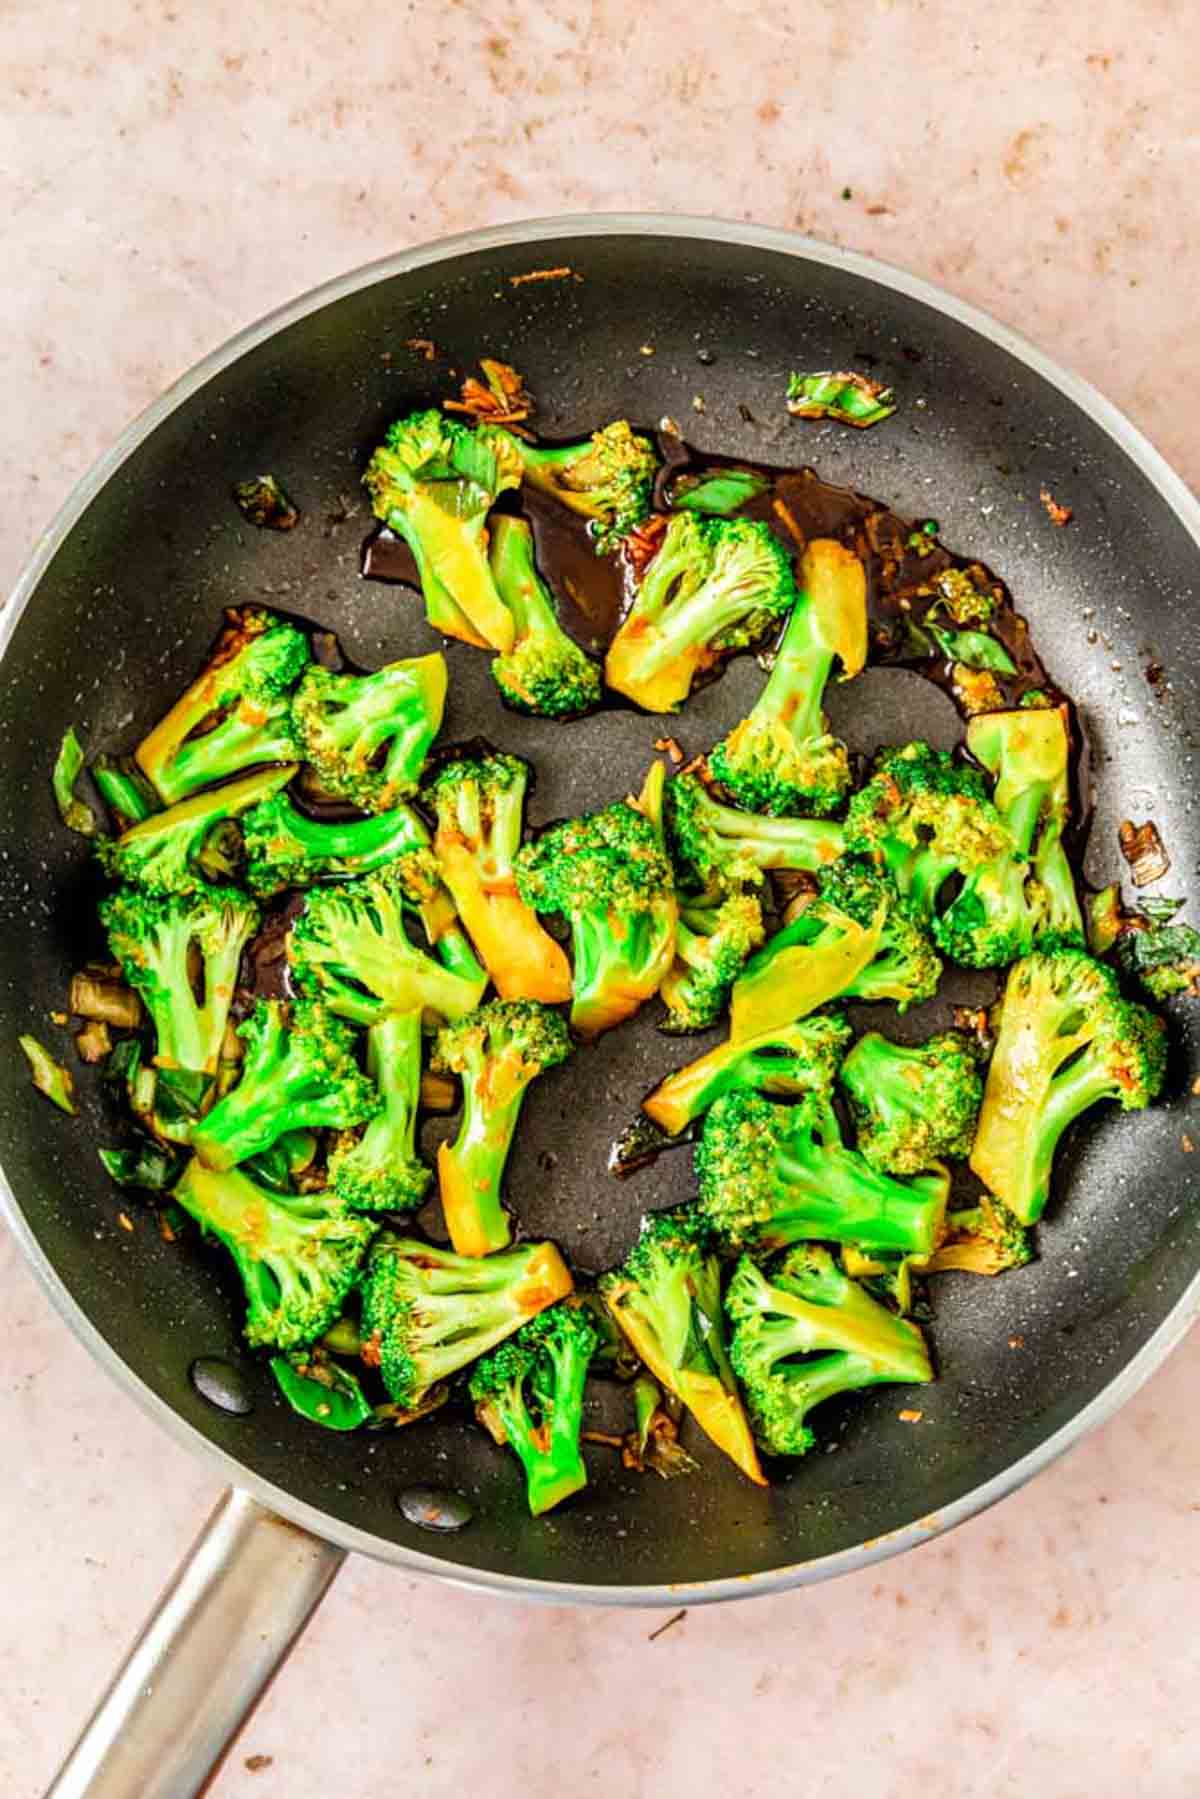 Broccoli cooking in a large skillet with teriyaki sauce.